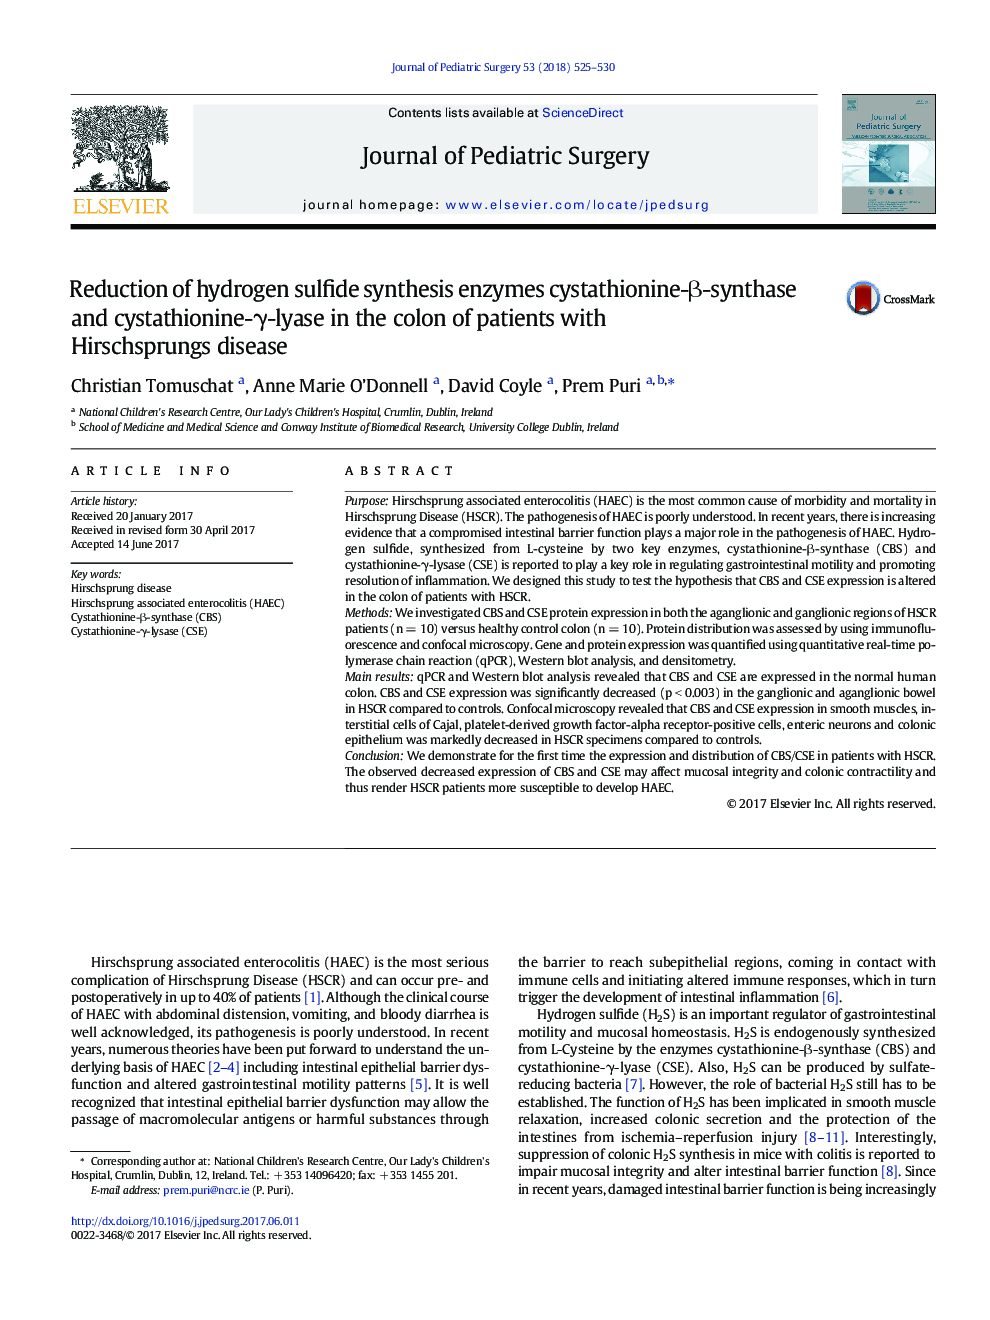 Reduction of hydrogen sulfide synthesis enzymes cystathionine-Î²-synthase and cystathionine-Î³-lyase in the colon of patients with Hirschsprungs disease